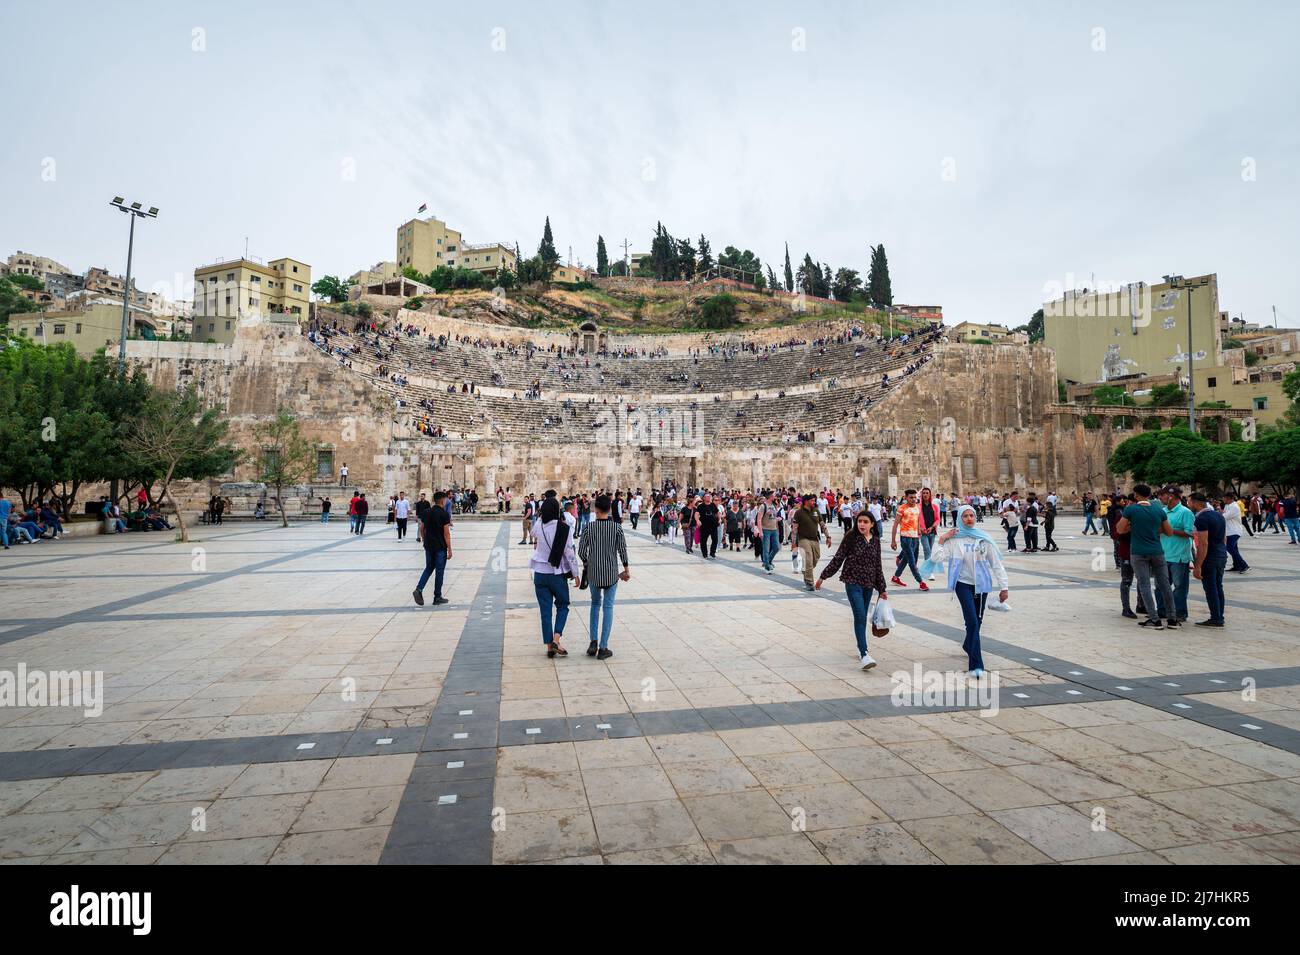 Amman, Jordan - May 2, 2022: People gathering at Amman downtown in front of ancient Roman theater structure to celebrate Eid muslim holiday among resi Stock Photo